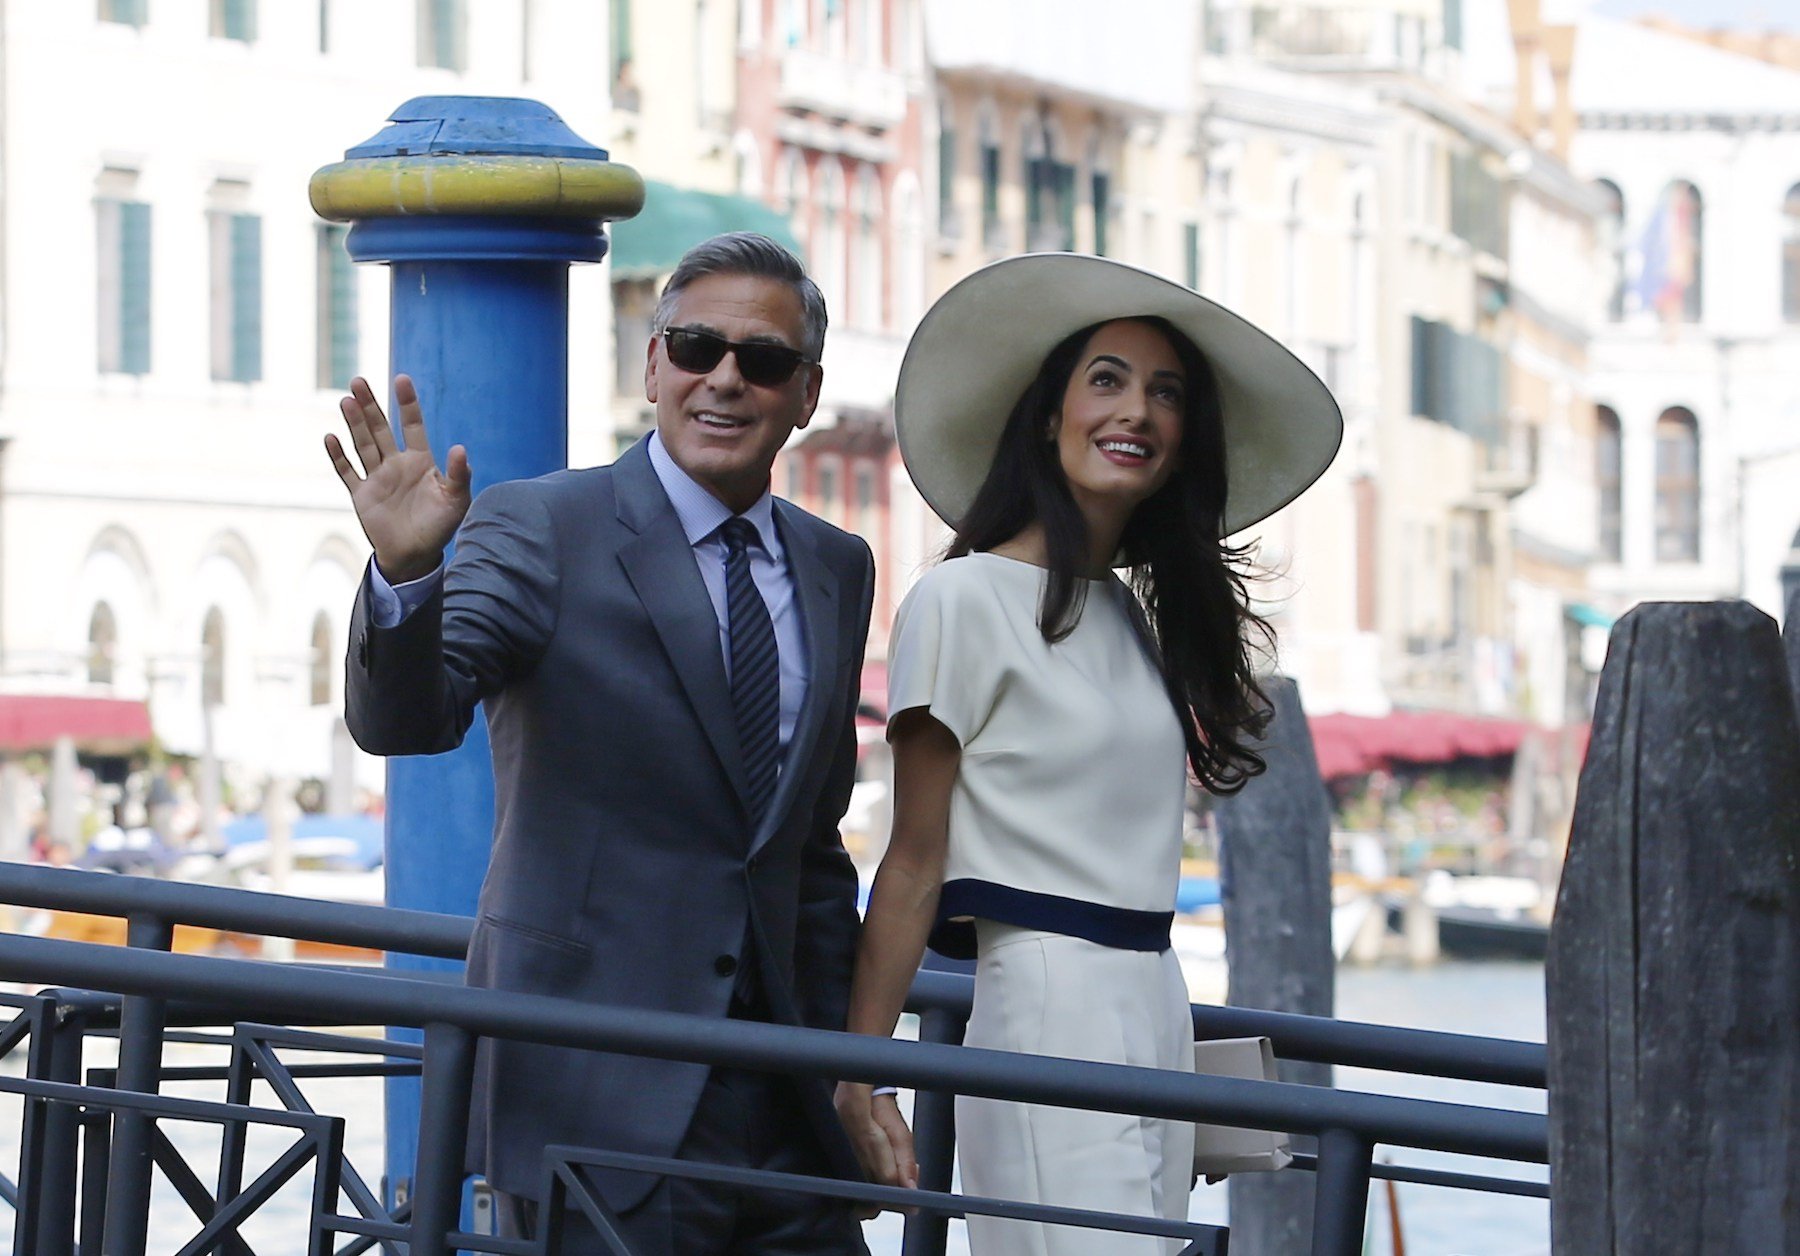 George Clooney and Amal Clooney attend a civil ceremony ahead of their Italian wedding